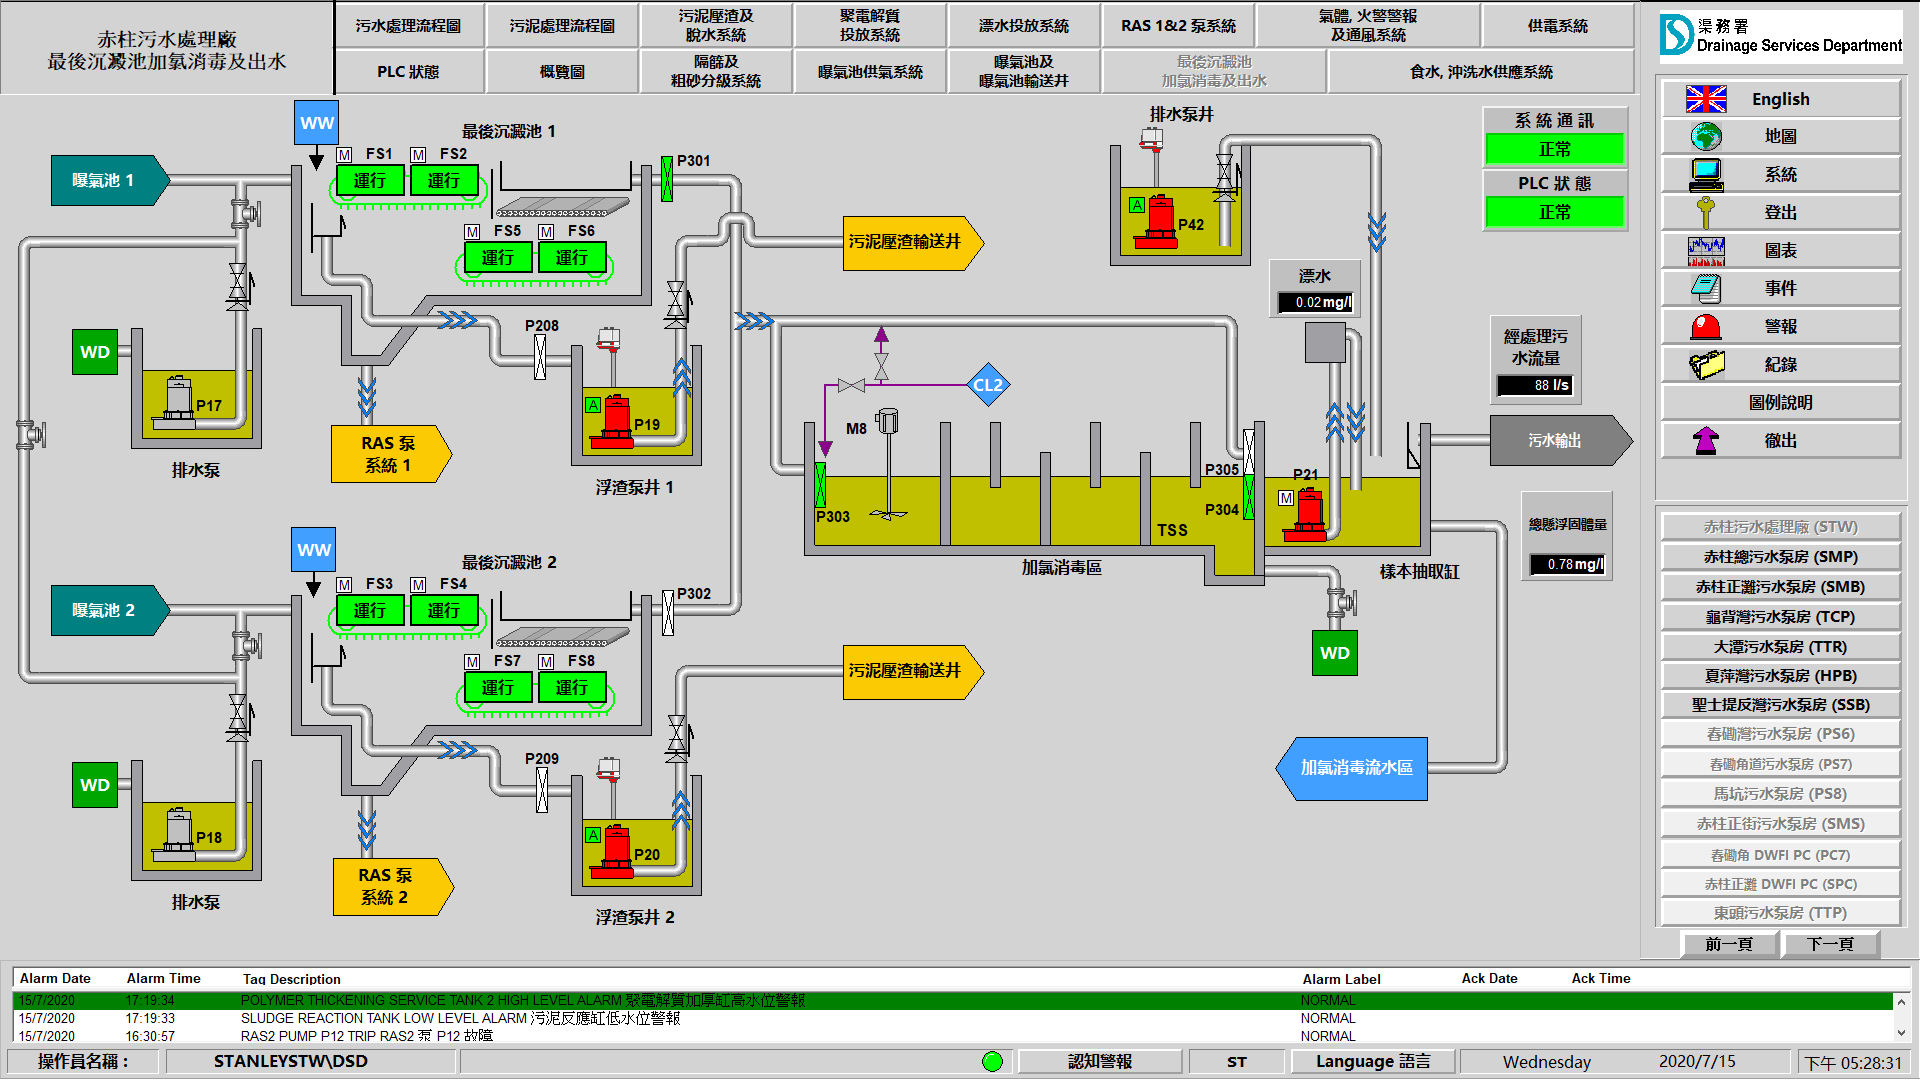 Final Settlement Tank, Chlorination & Outfall screenshot from FactoryTalk View After Works in DSD Stanley STW (Typical)